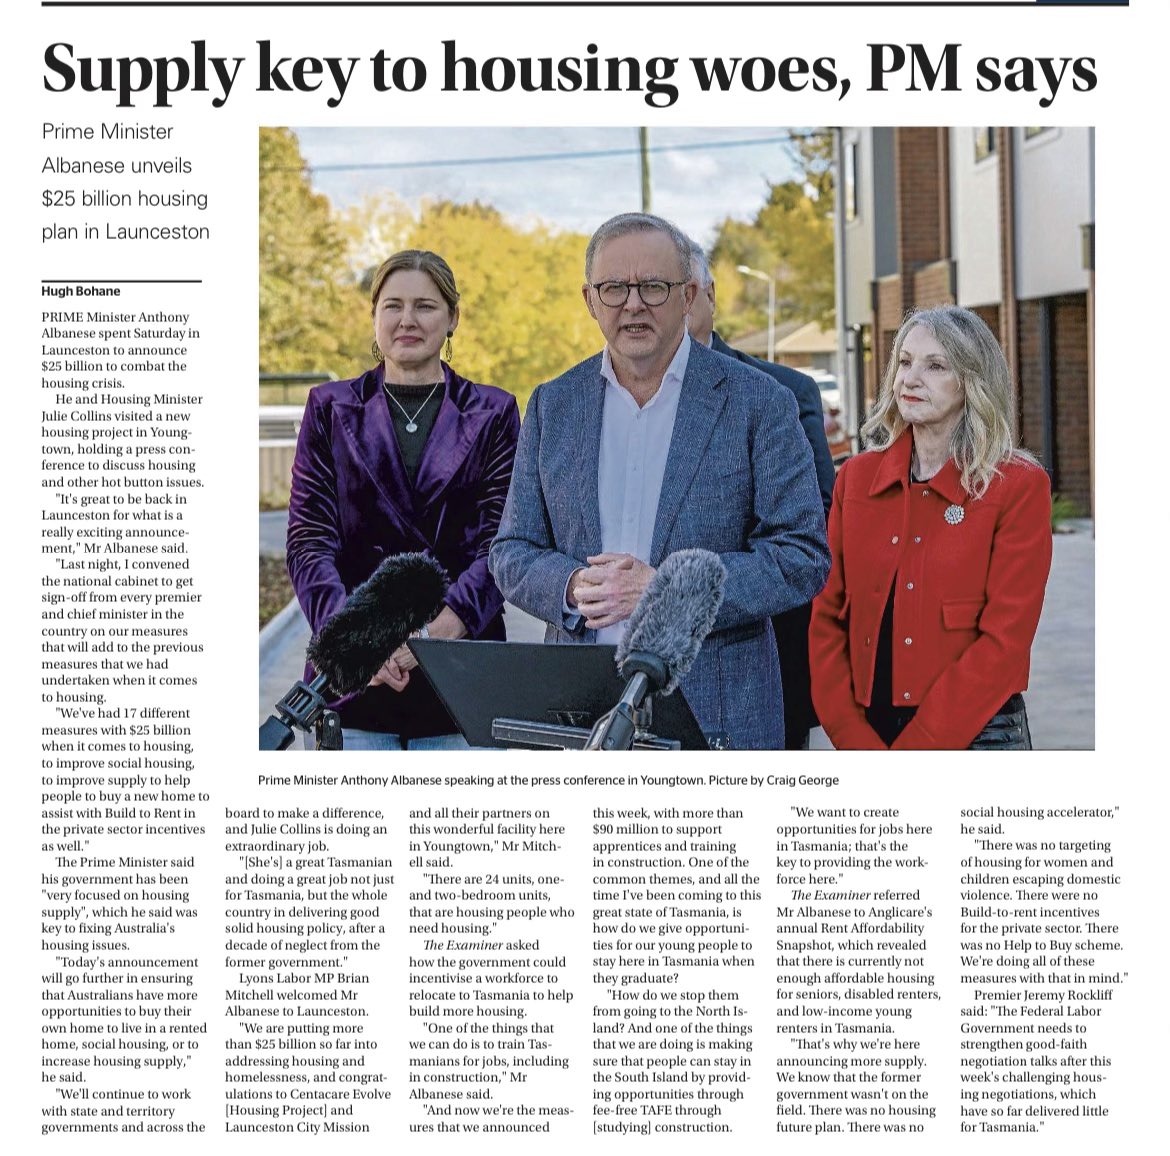 Building more houses will ease supply and provide Tasmanians the opportunity to get into the housing market.  #affordablehousing #homeless #familyviolence #domestic #family #violence @AustralianLabor @TasmanianLabor #auspol #politas